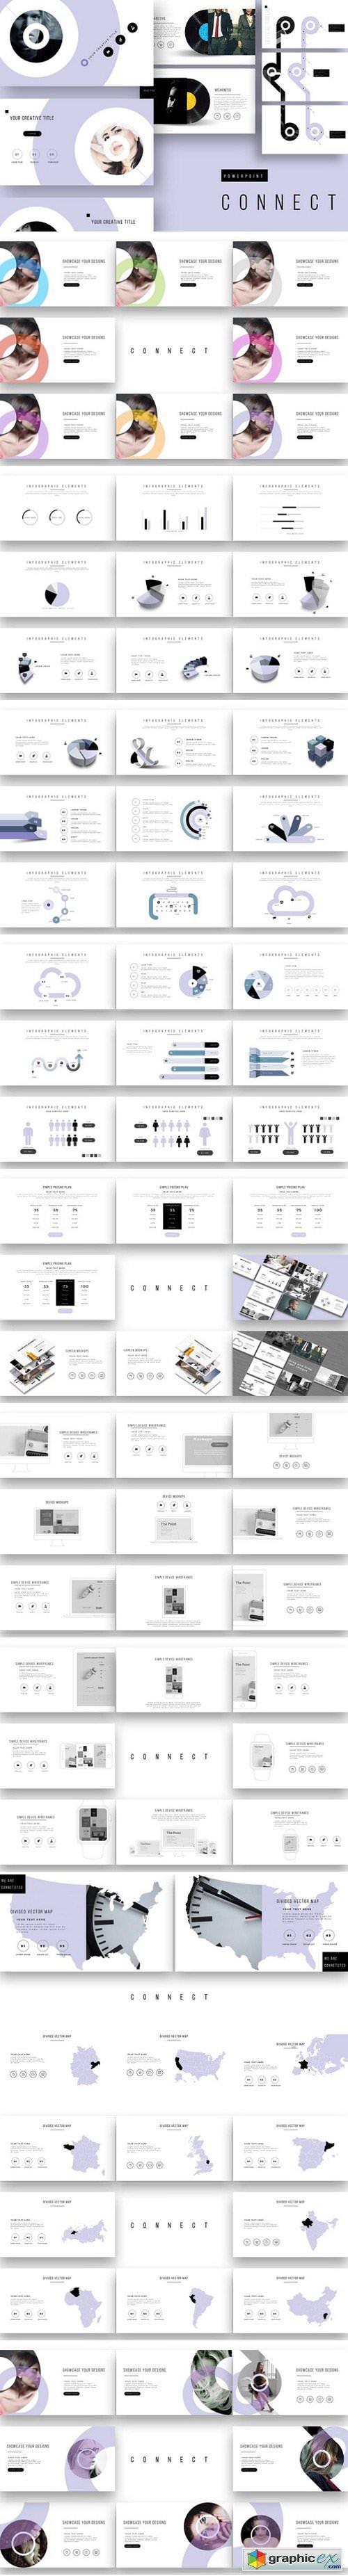 CONNECT PowerPoint Template + Update